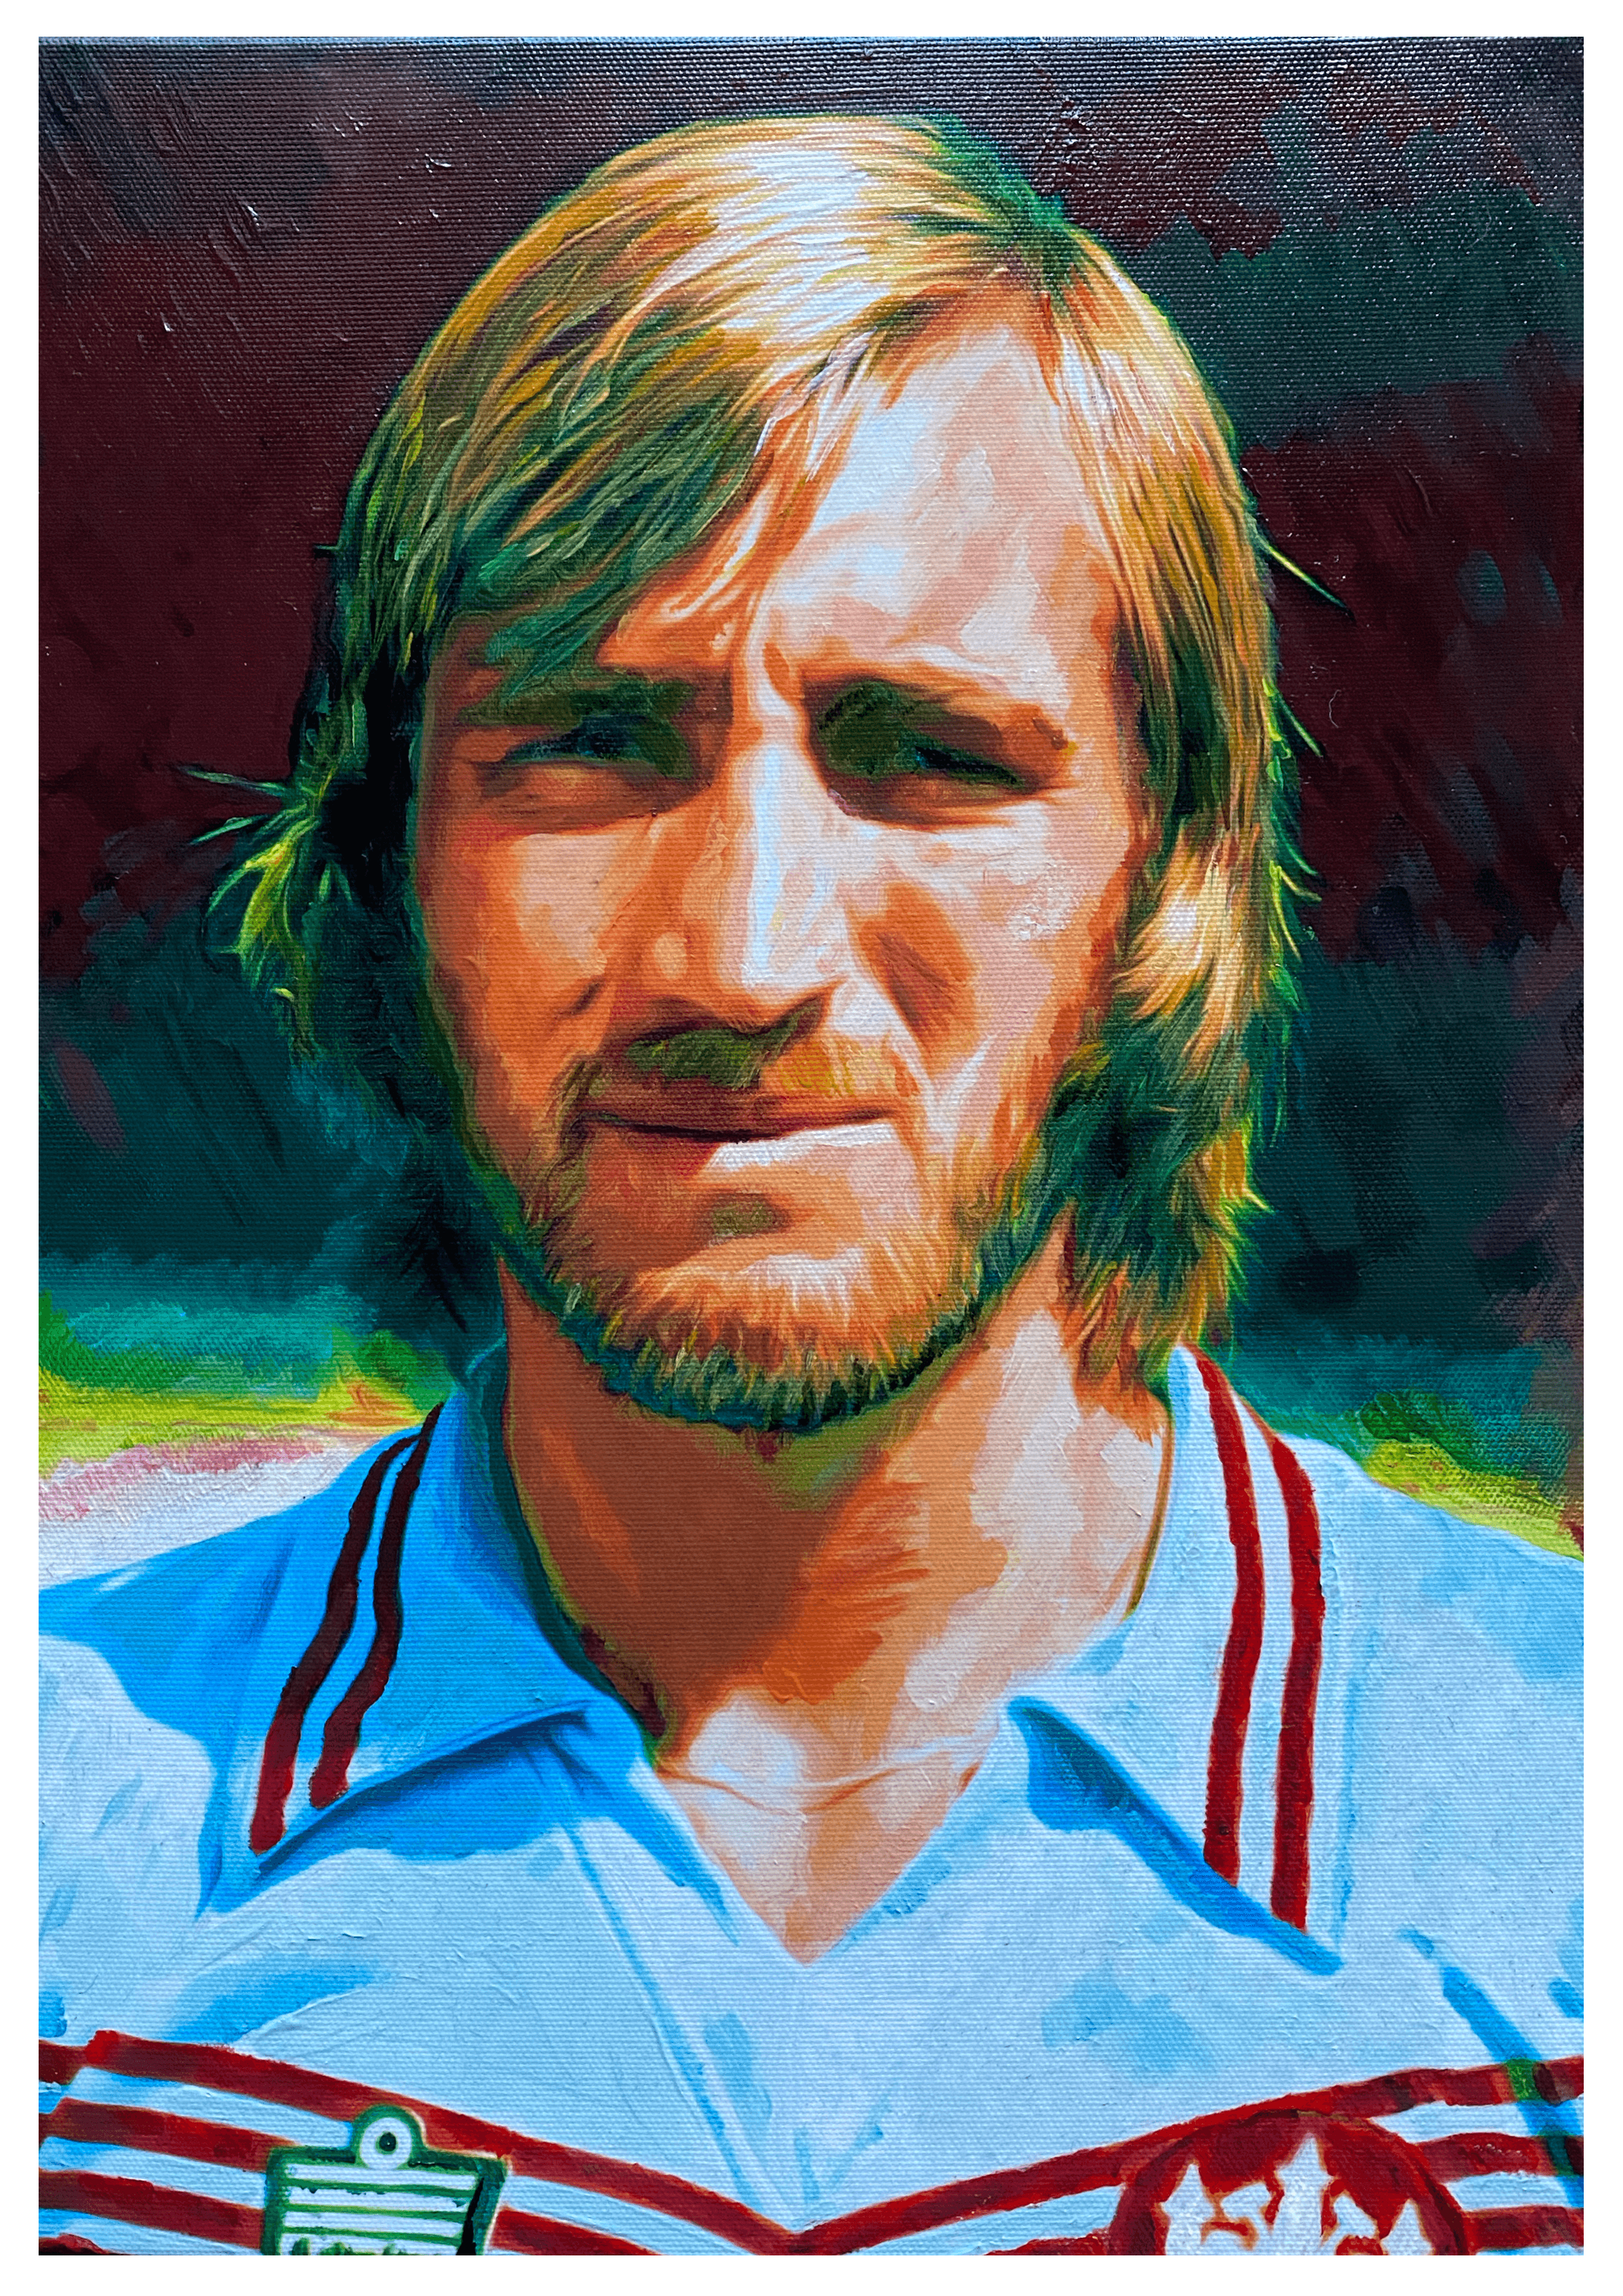 002 – Billy Bonds in the Long, Hot Summer of '76